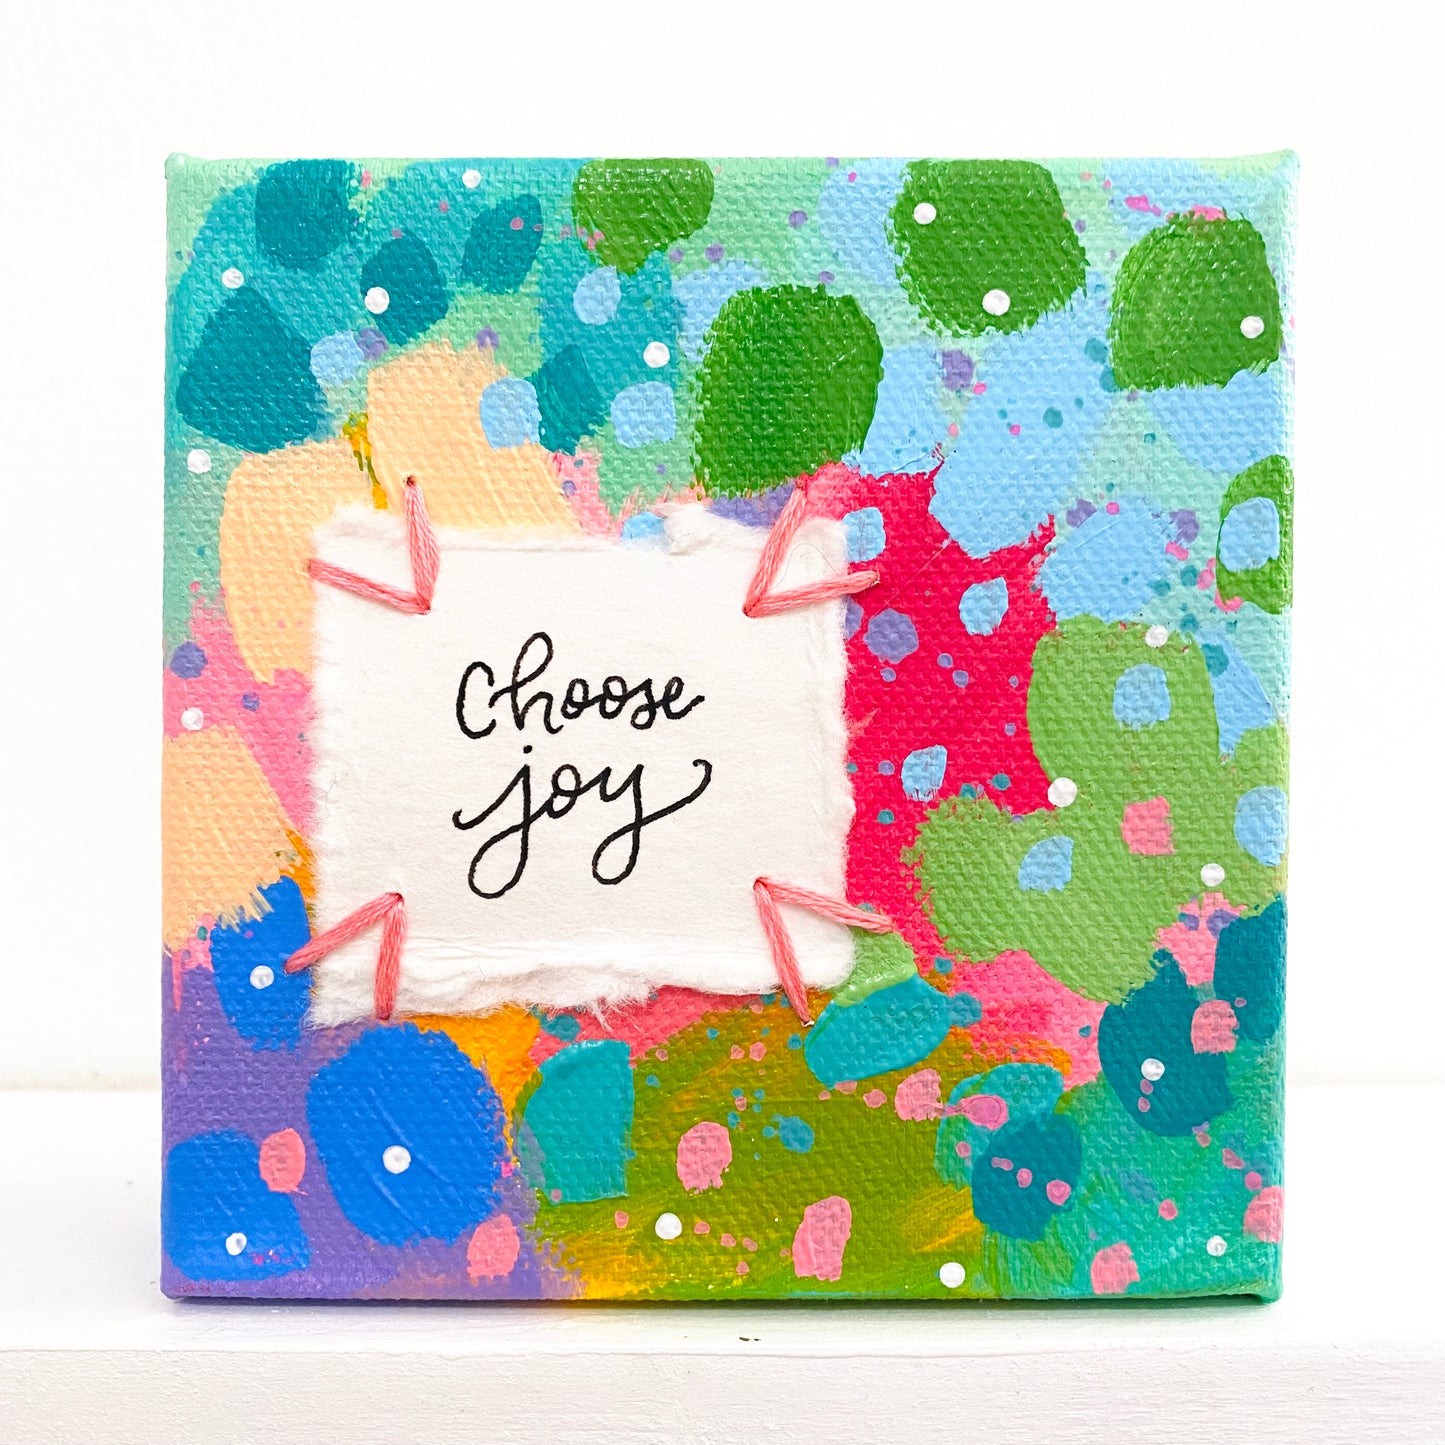 Choose Joy 4x4 inch original abstract canvas with embroidery thread accents